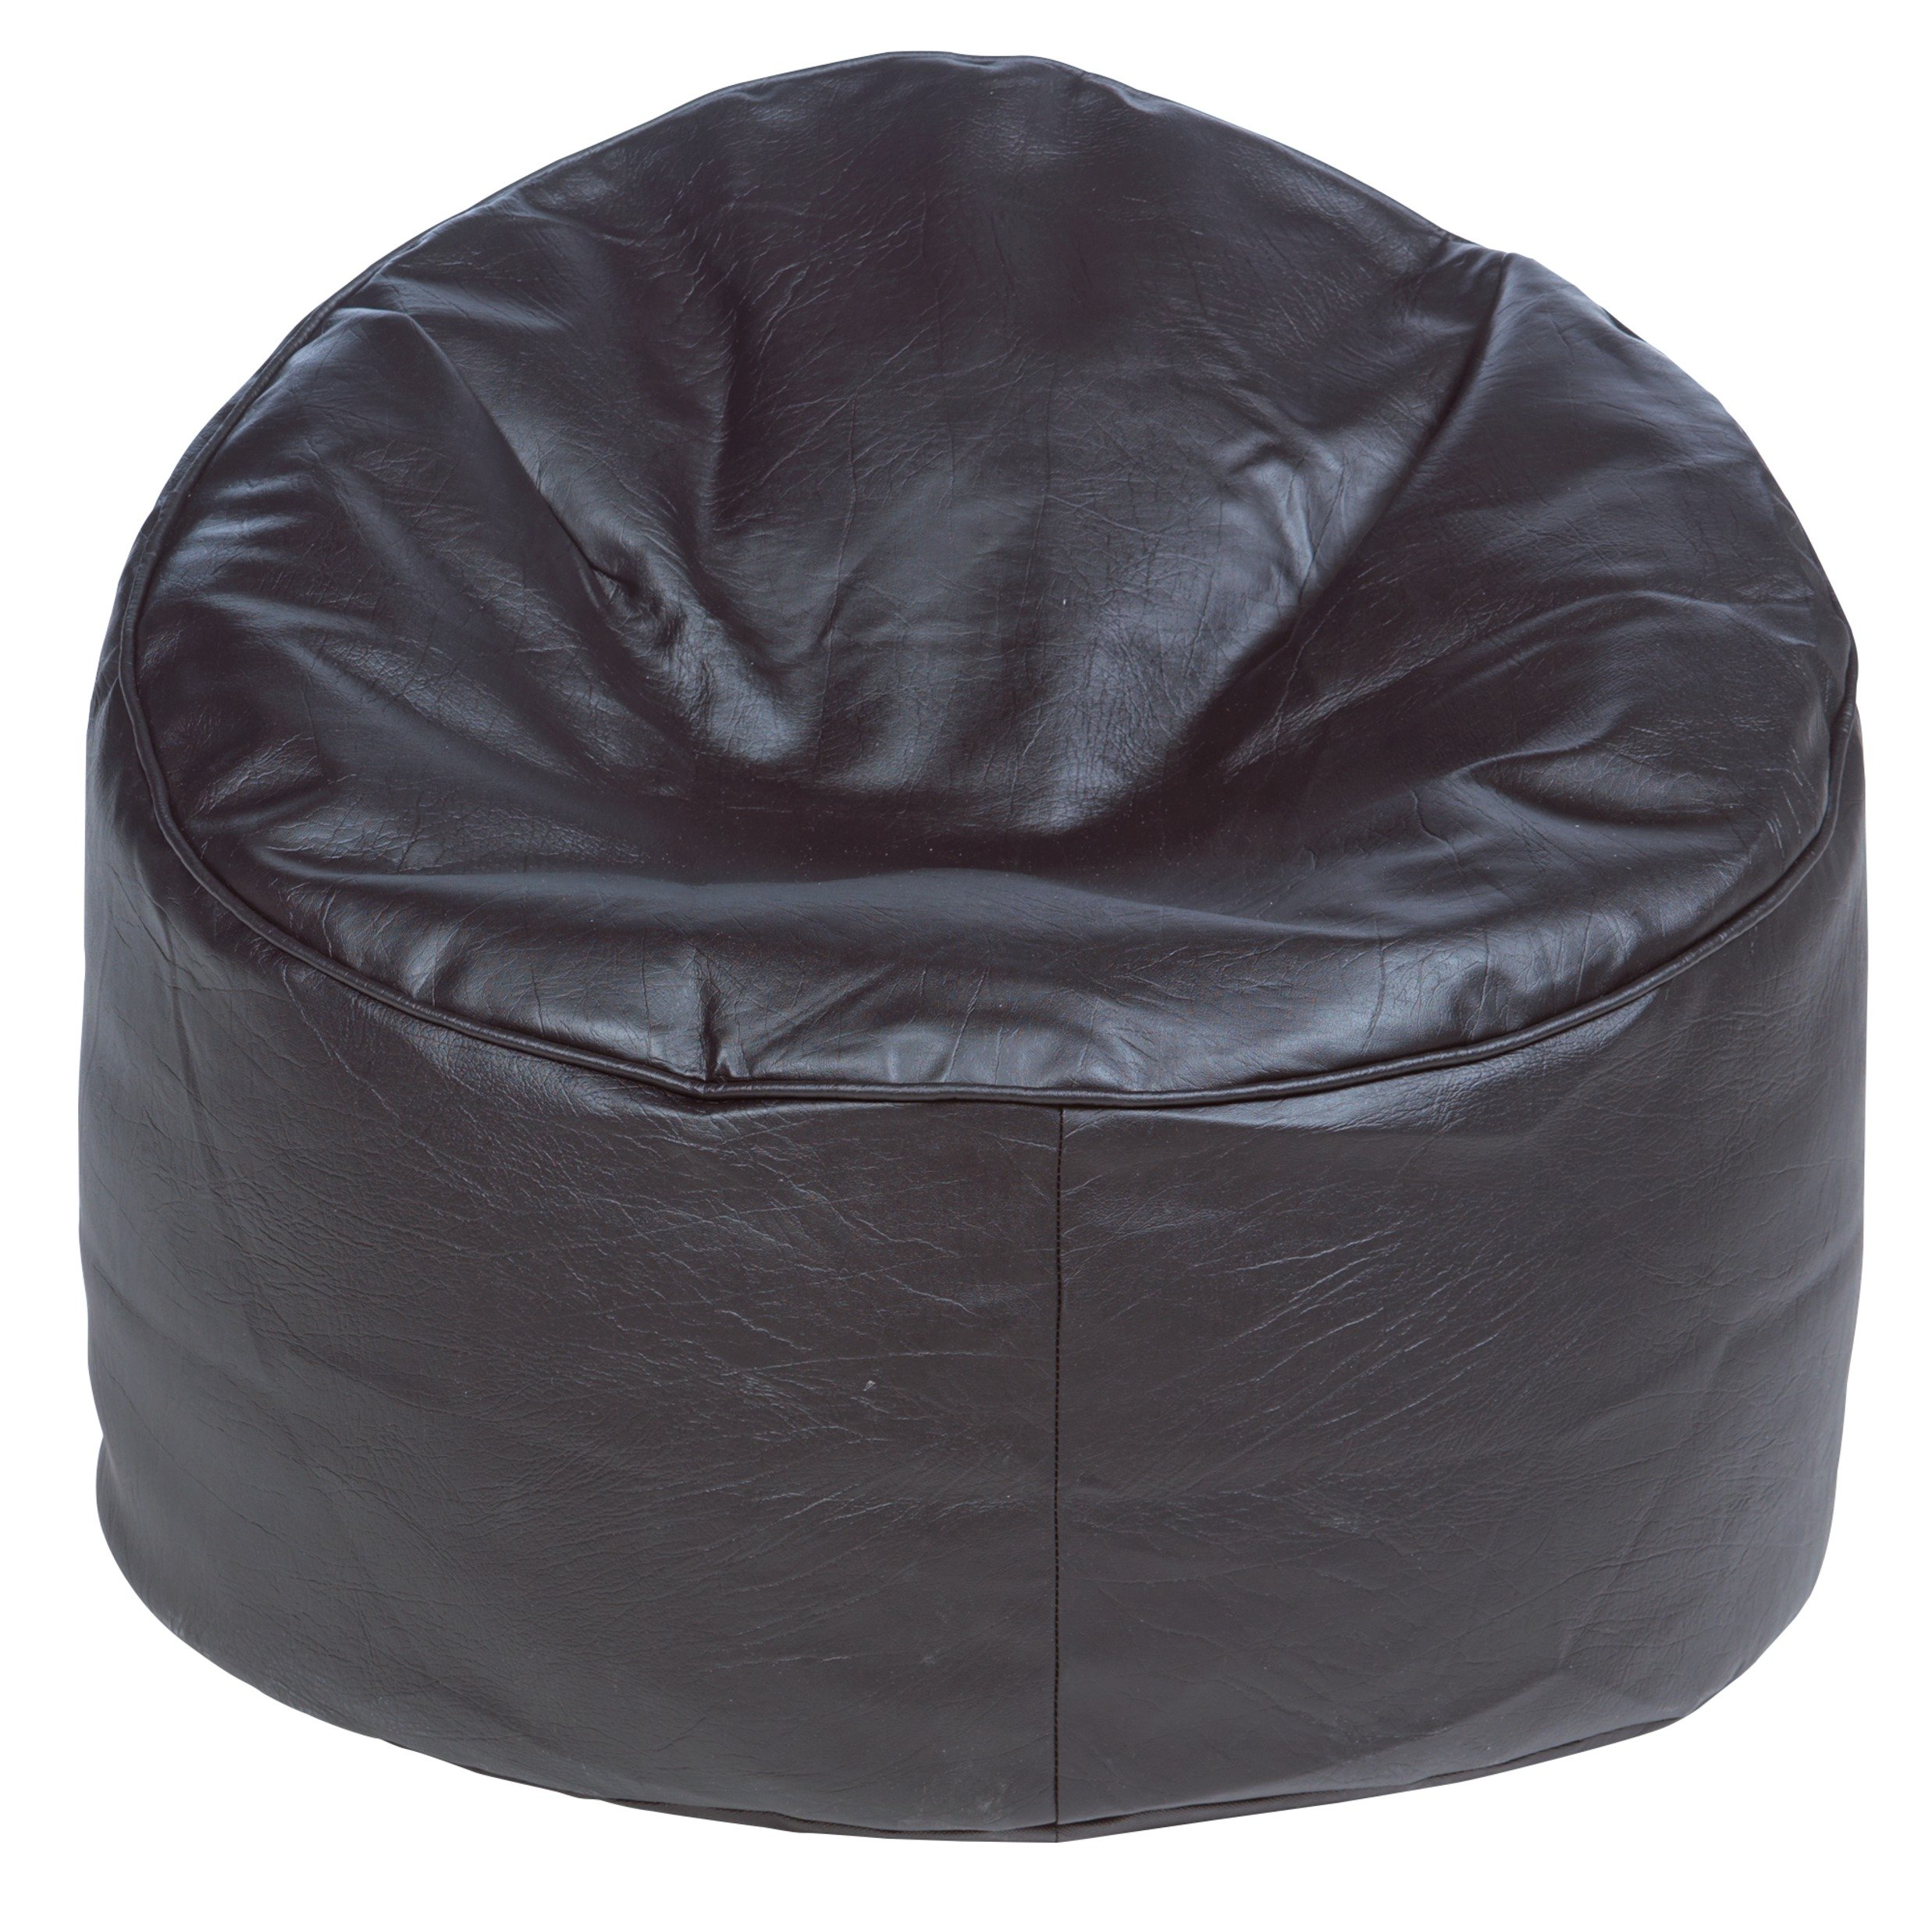 HOME Leather Effect Bean Chair - Chocolate.